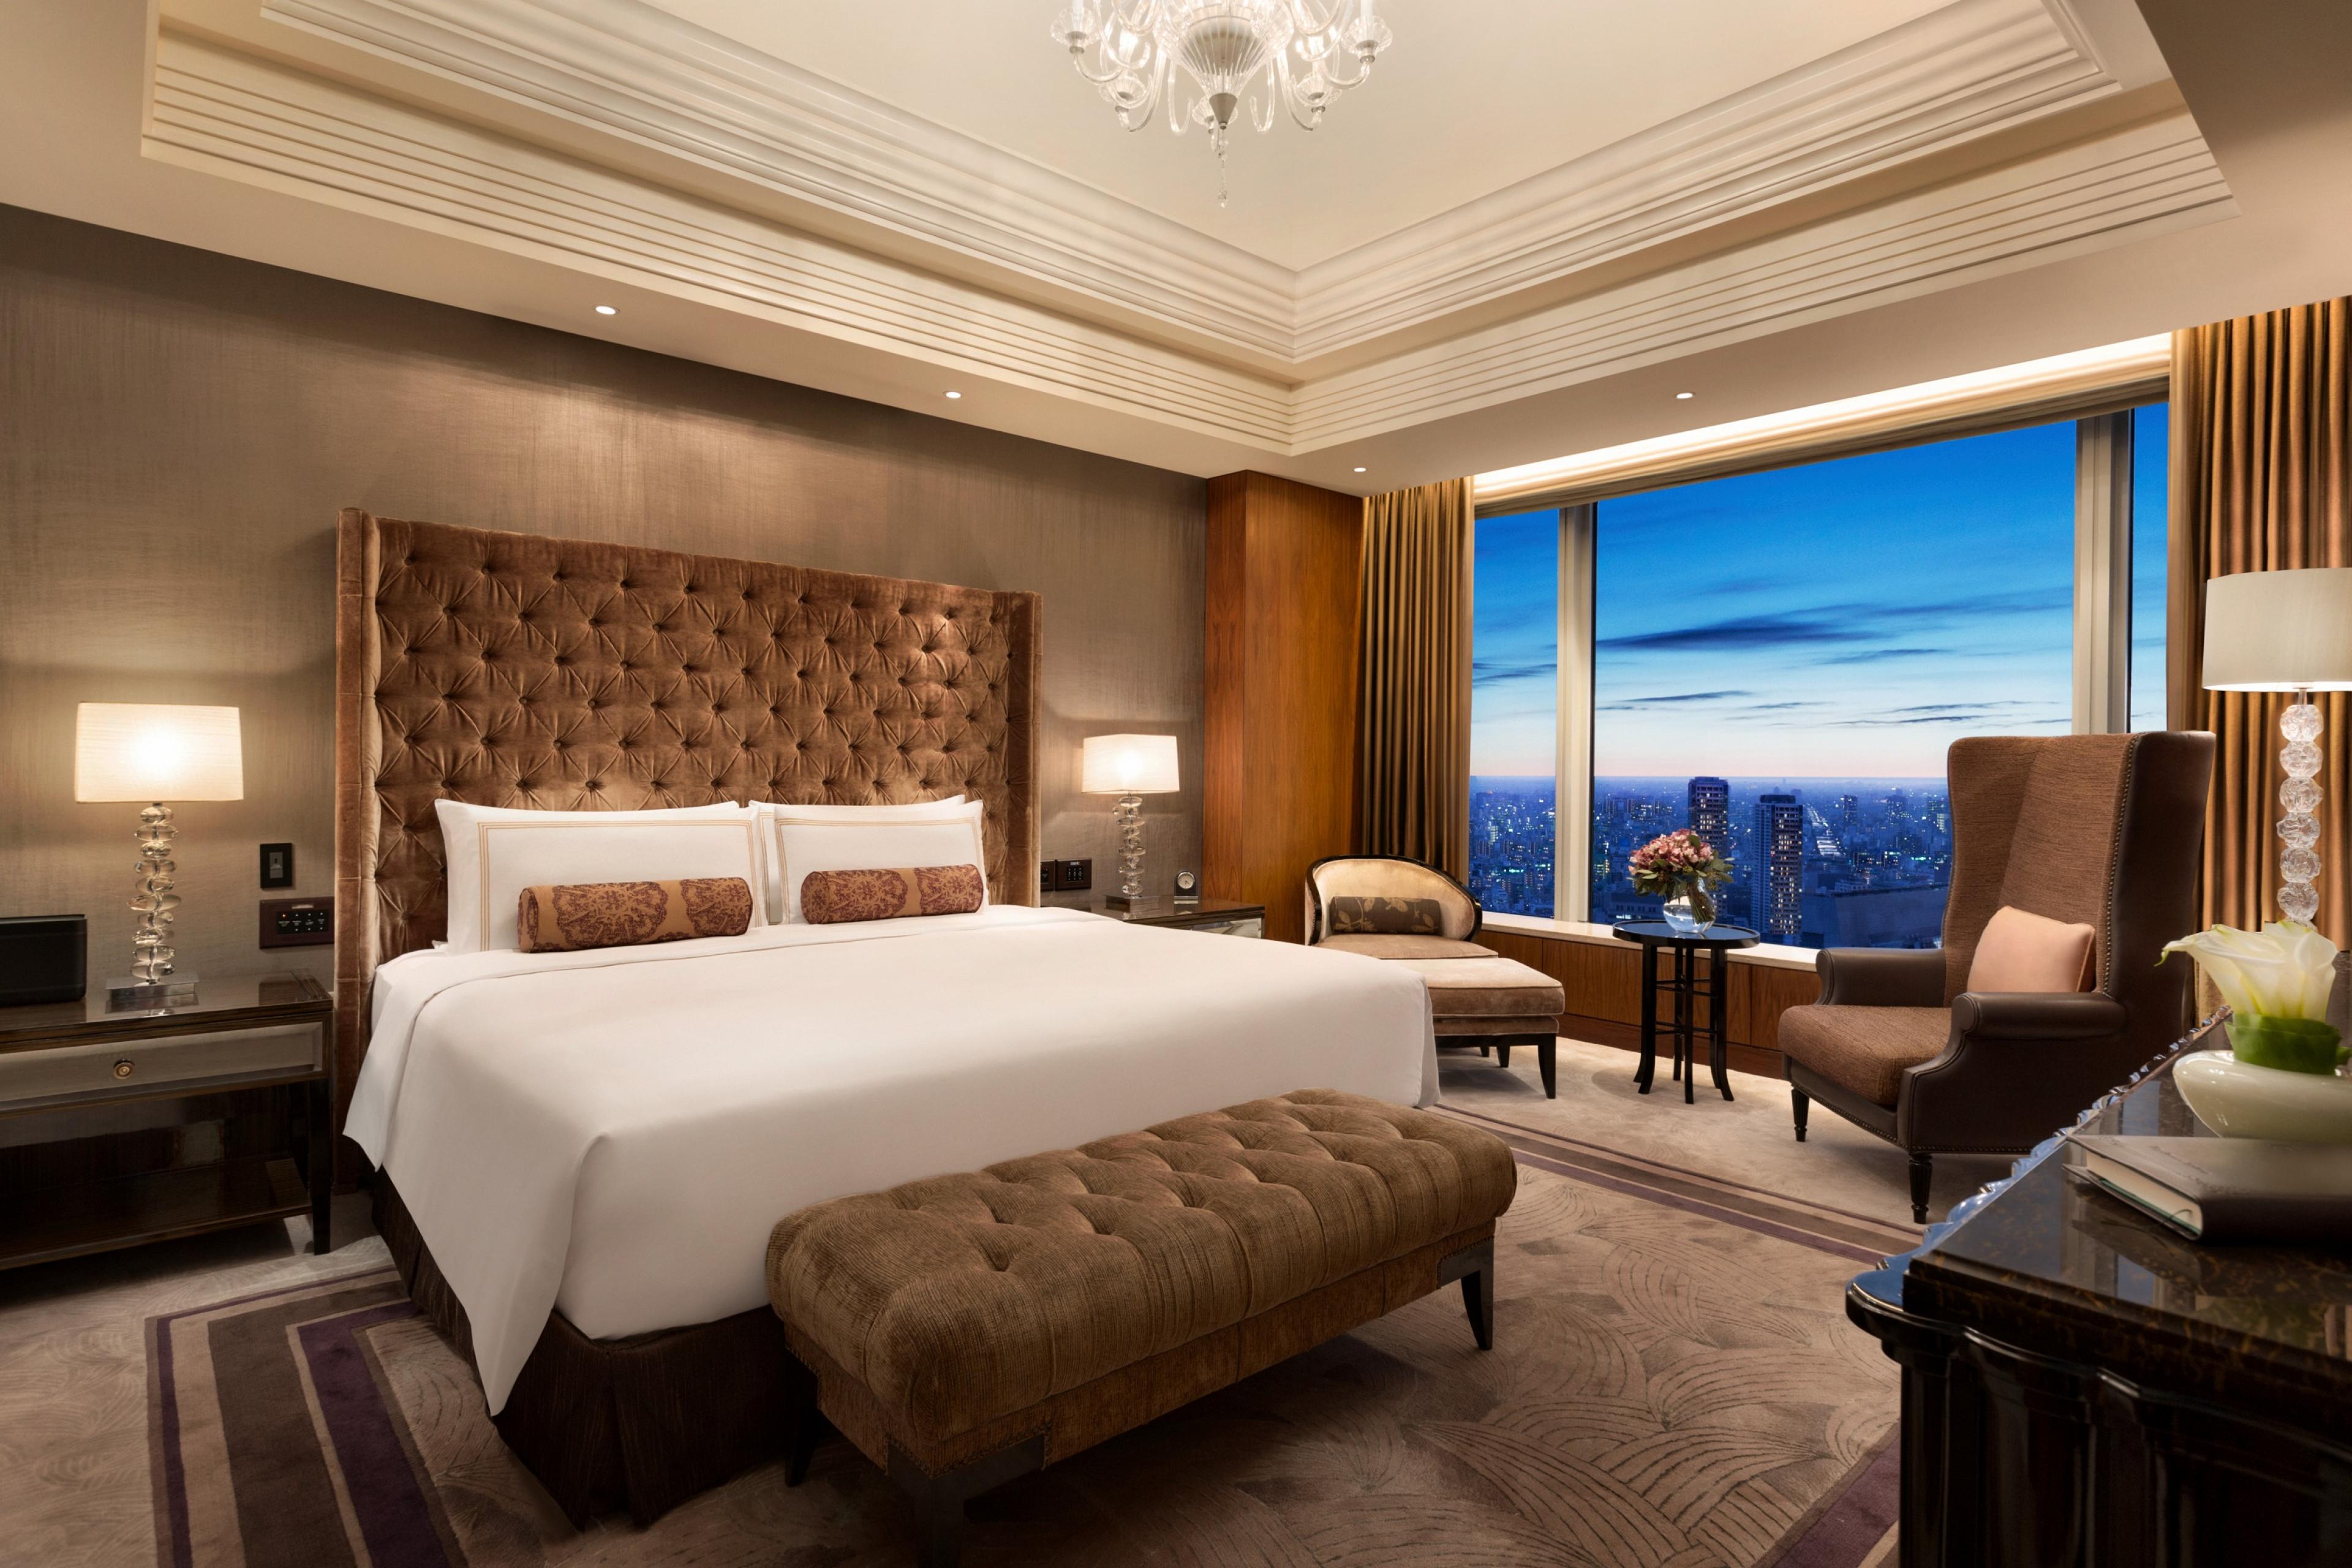 hotel bedroom with a tufted headboard and views of the city at dusk